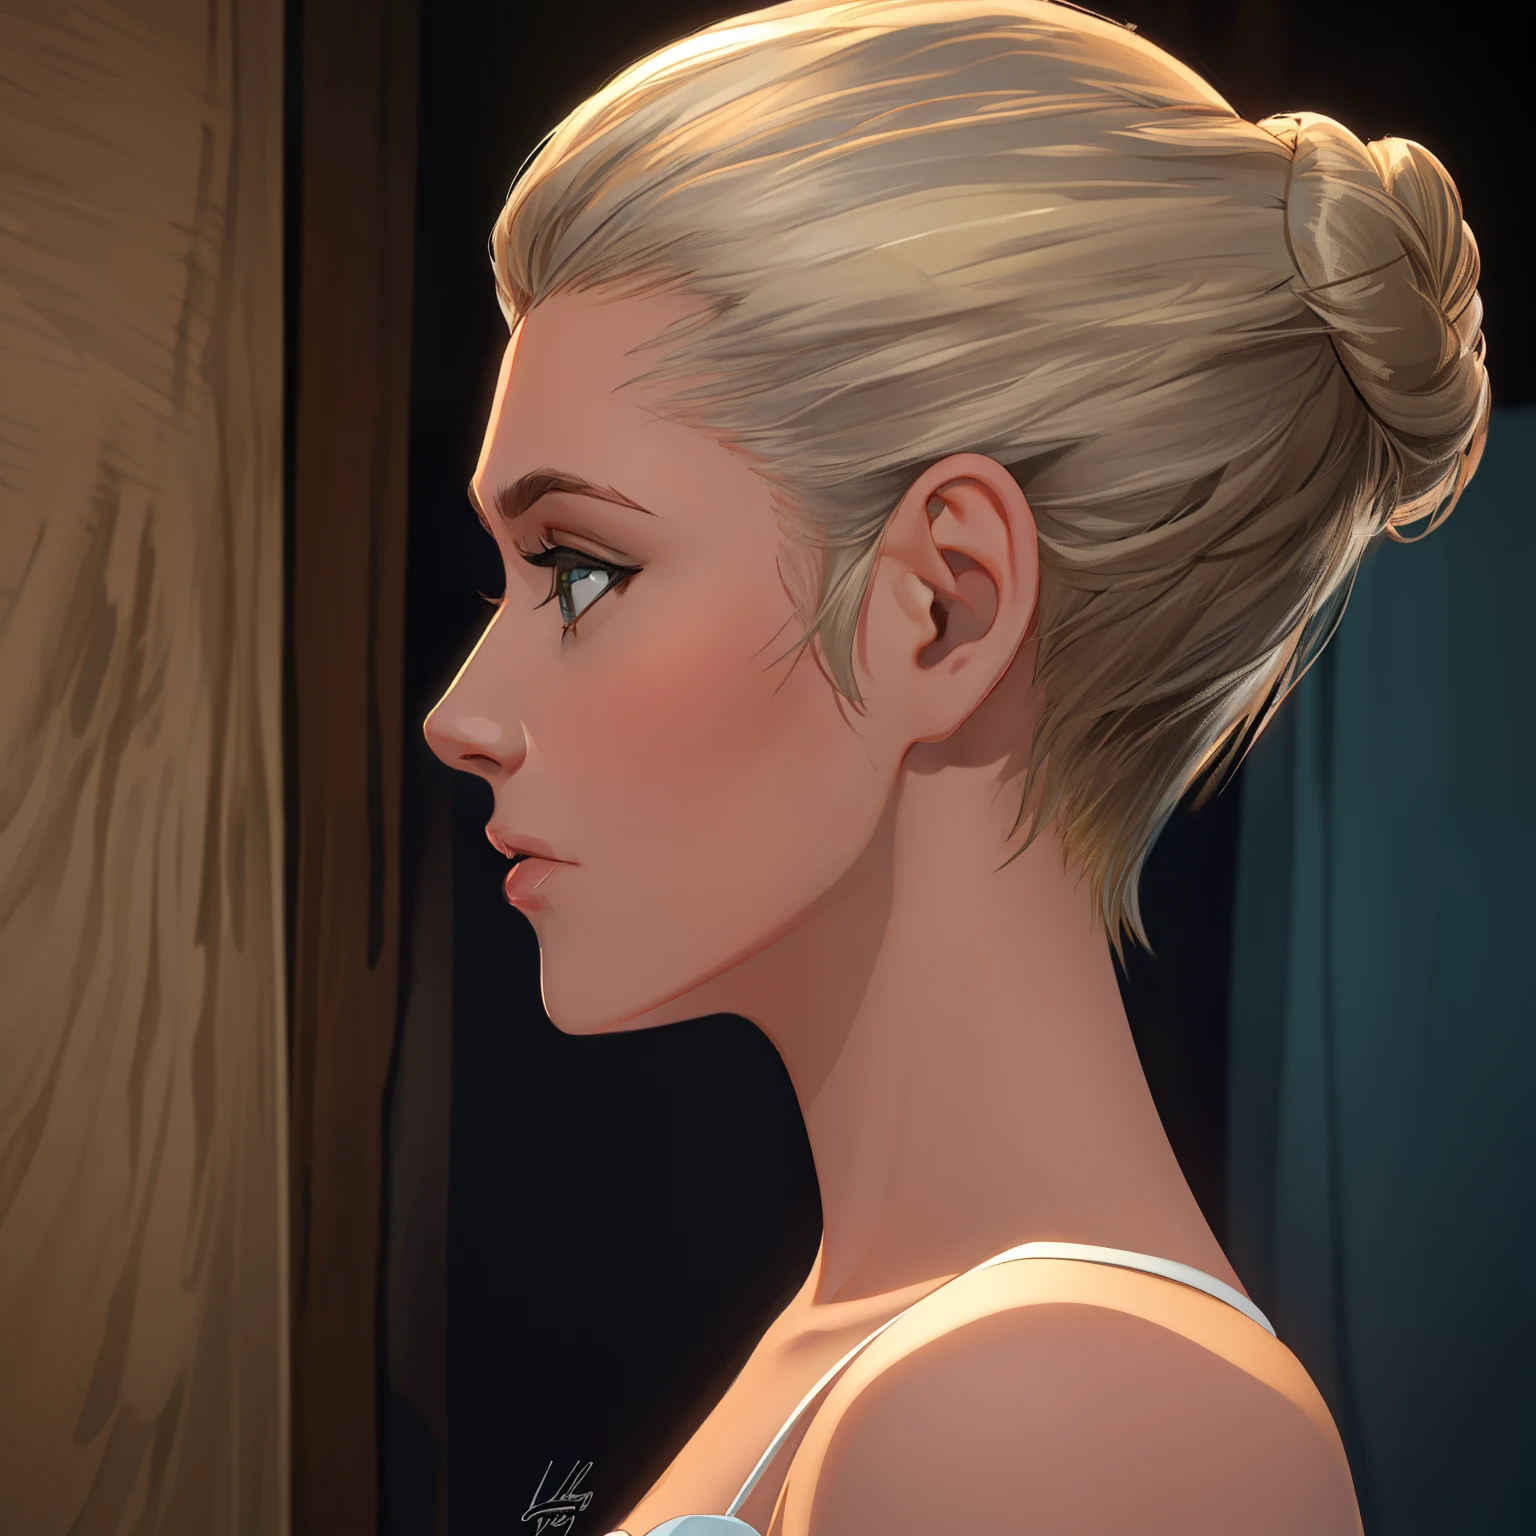 There&#39;s a woman with a bun in her hair, profile posing, elegant profile pose, elegant profile pose, profile posing, side profile portrait, side profile centered portrait, a woman's profile, hair styled into a bun, woman's profile, side profile cenetered portrait, profile face, flat hair, profile face, head turned to the side